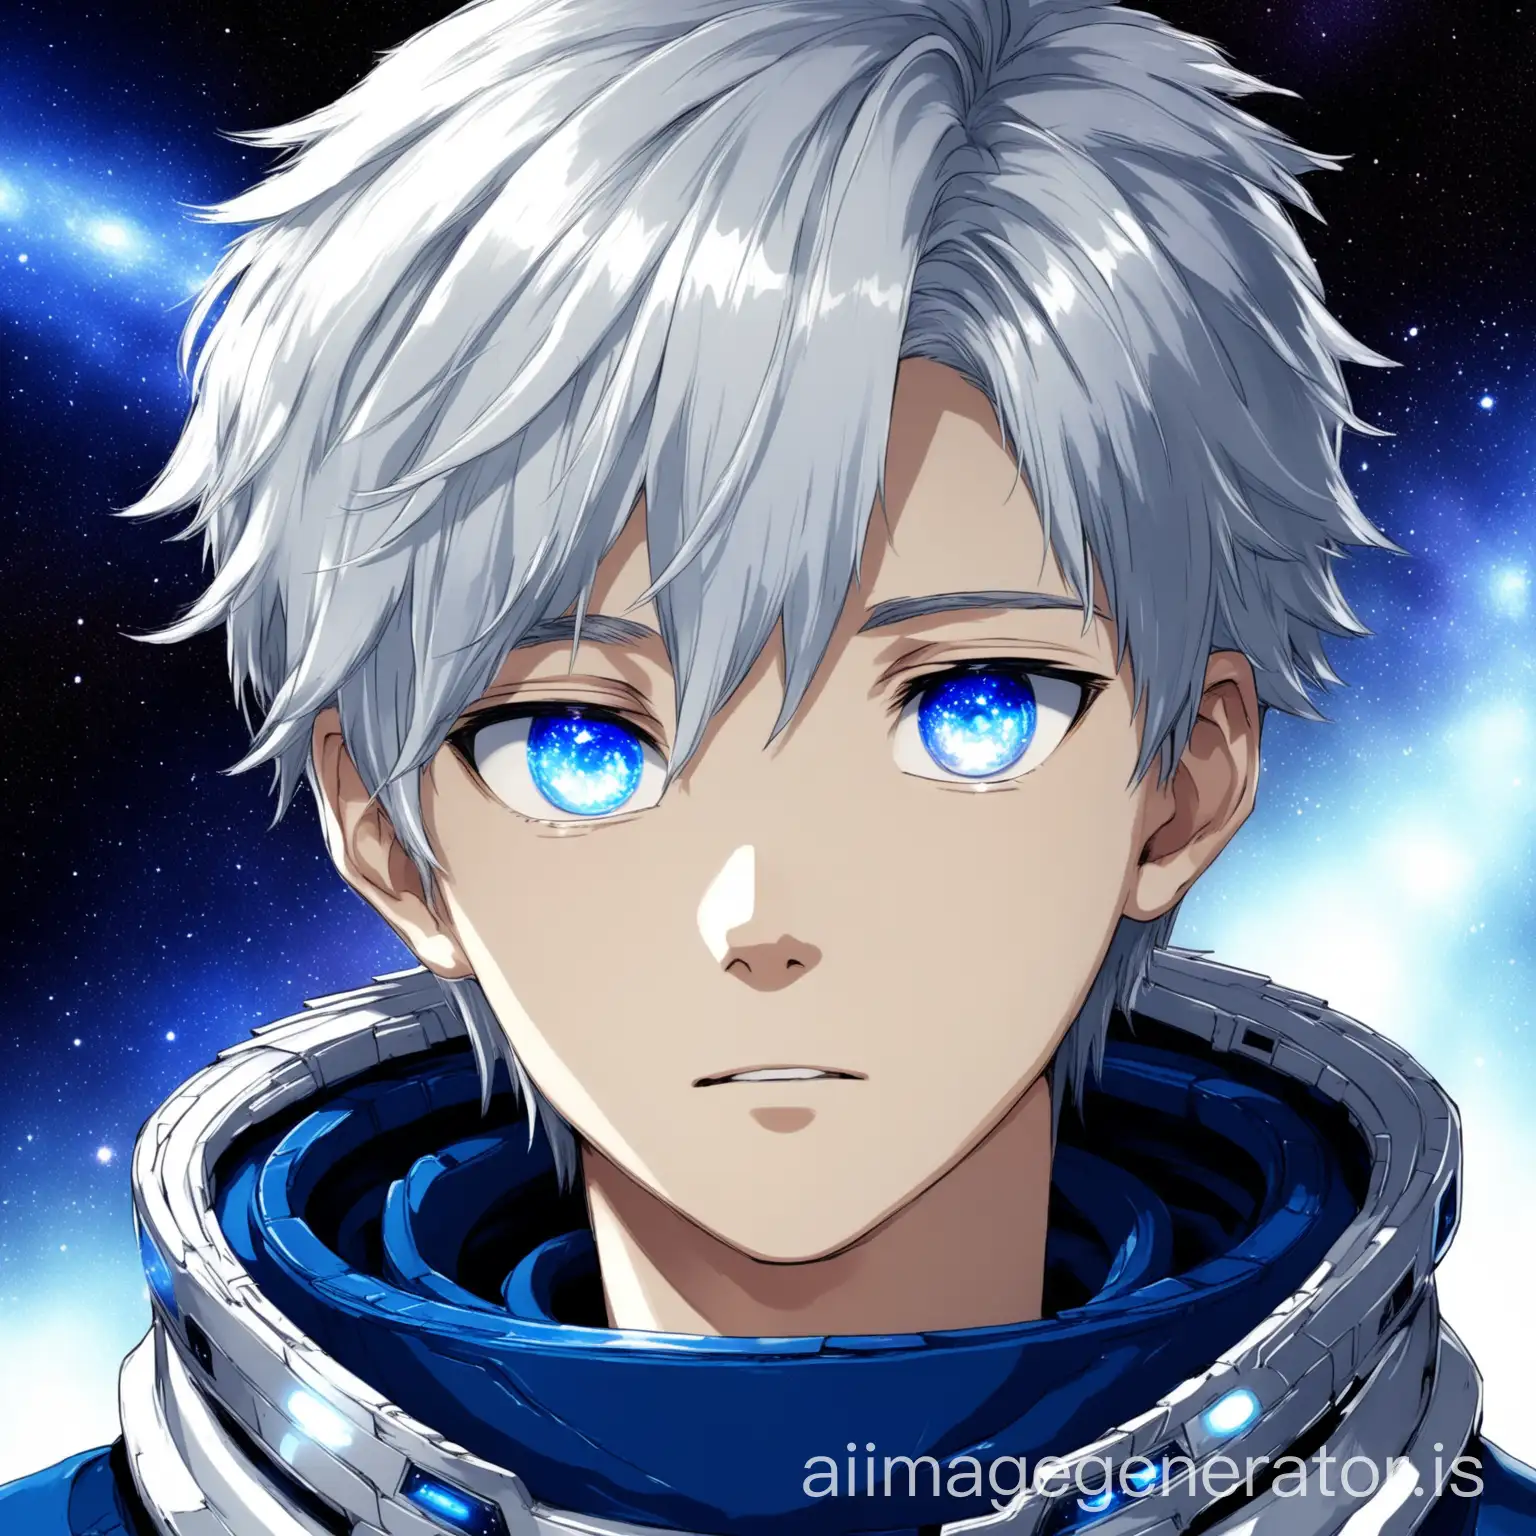 Galactic-Teen-with-Silver-Hair-and-Blue-Eyes